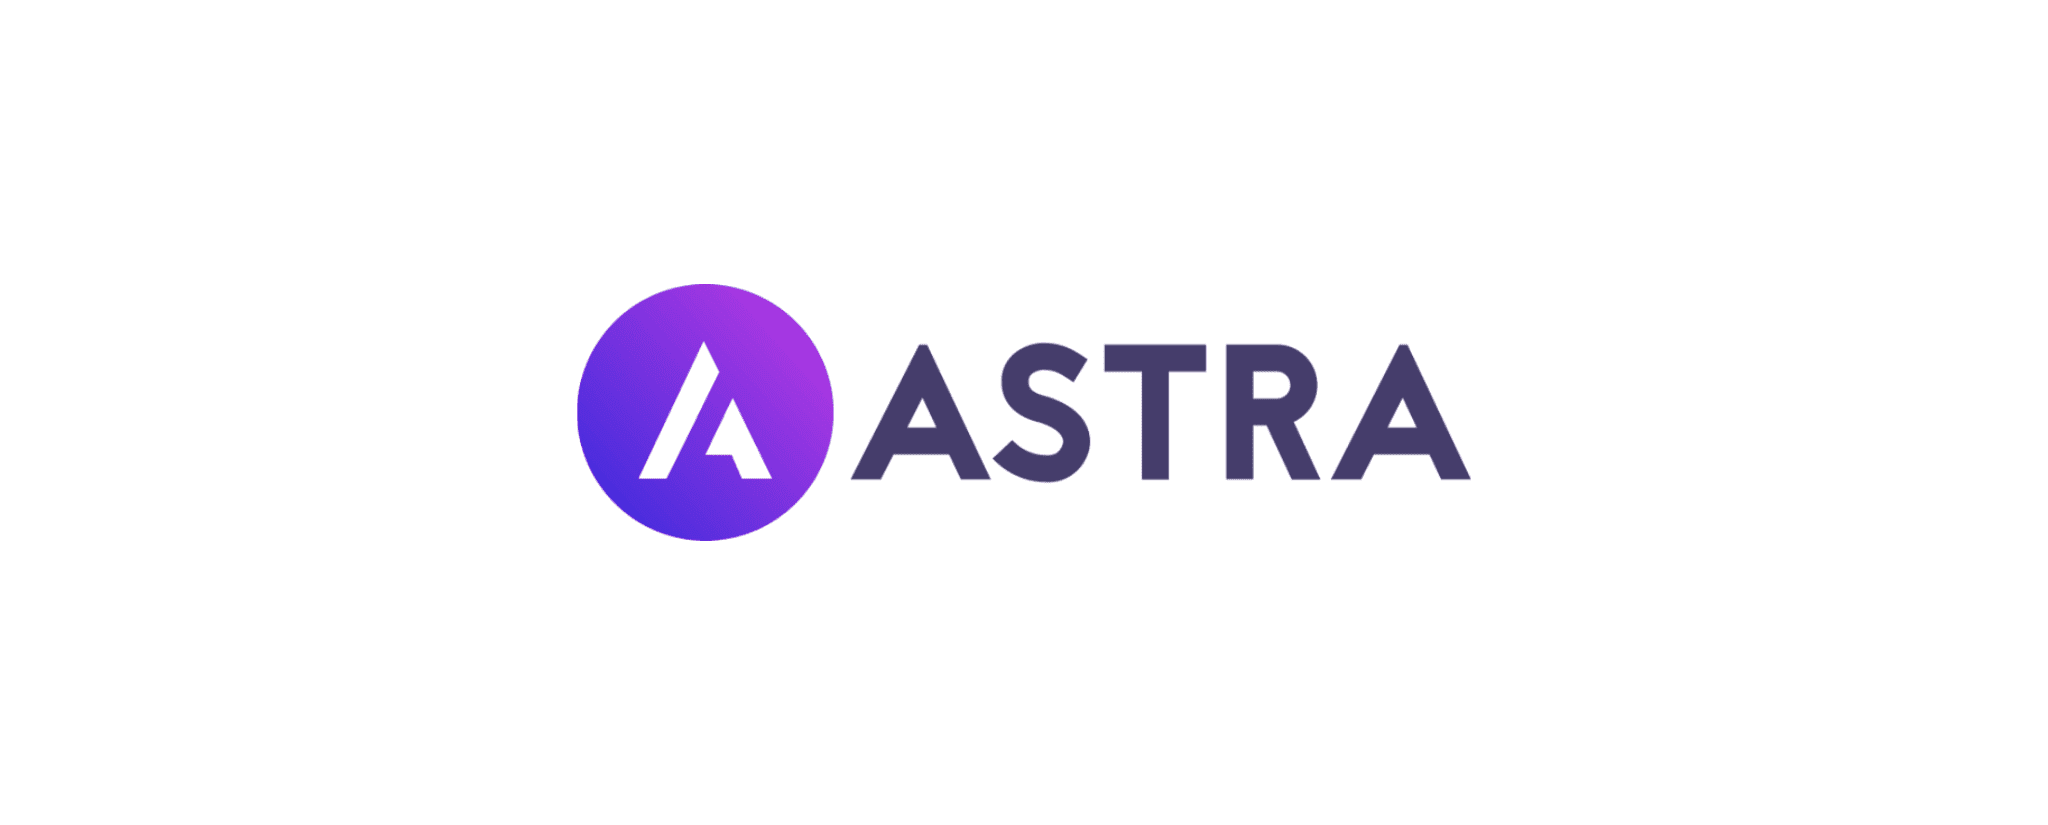 Astra by Brainstorm Force